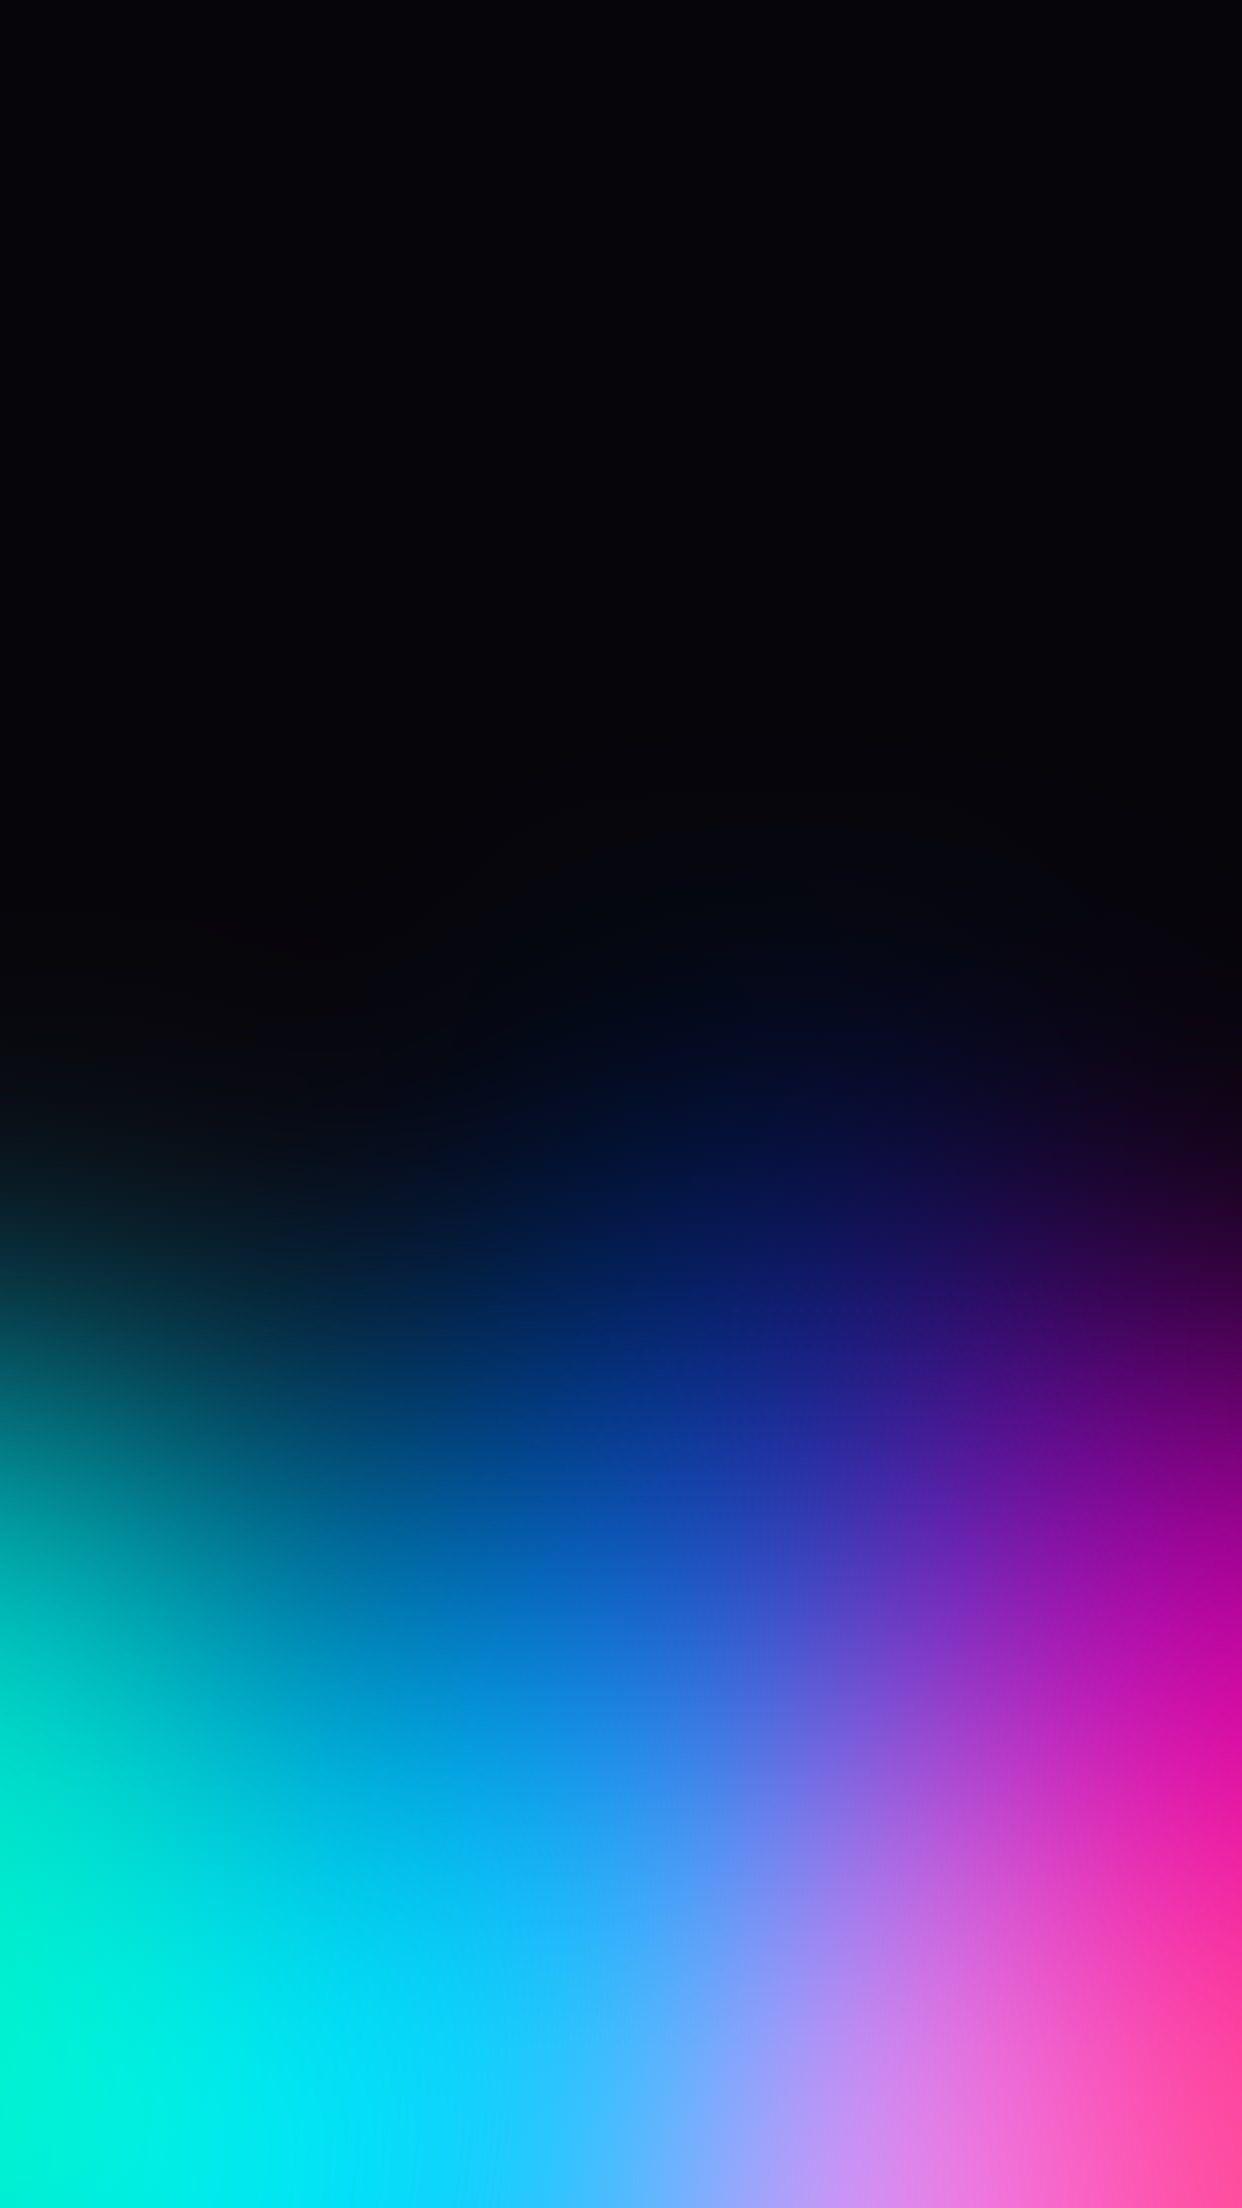 Beautiful gradient, hides the notch!. Wall paper